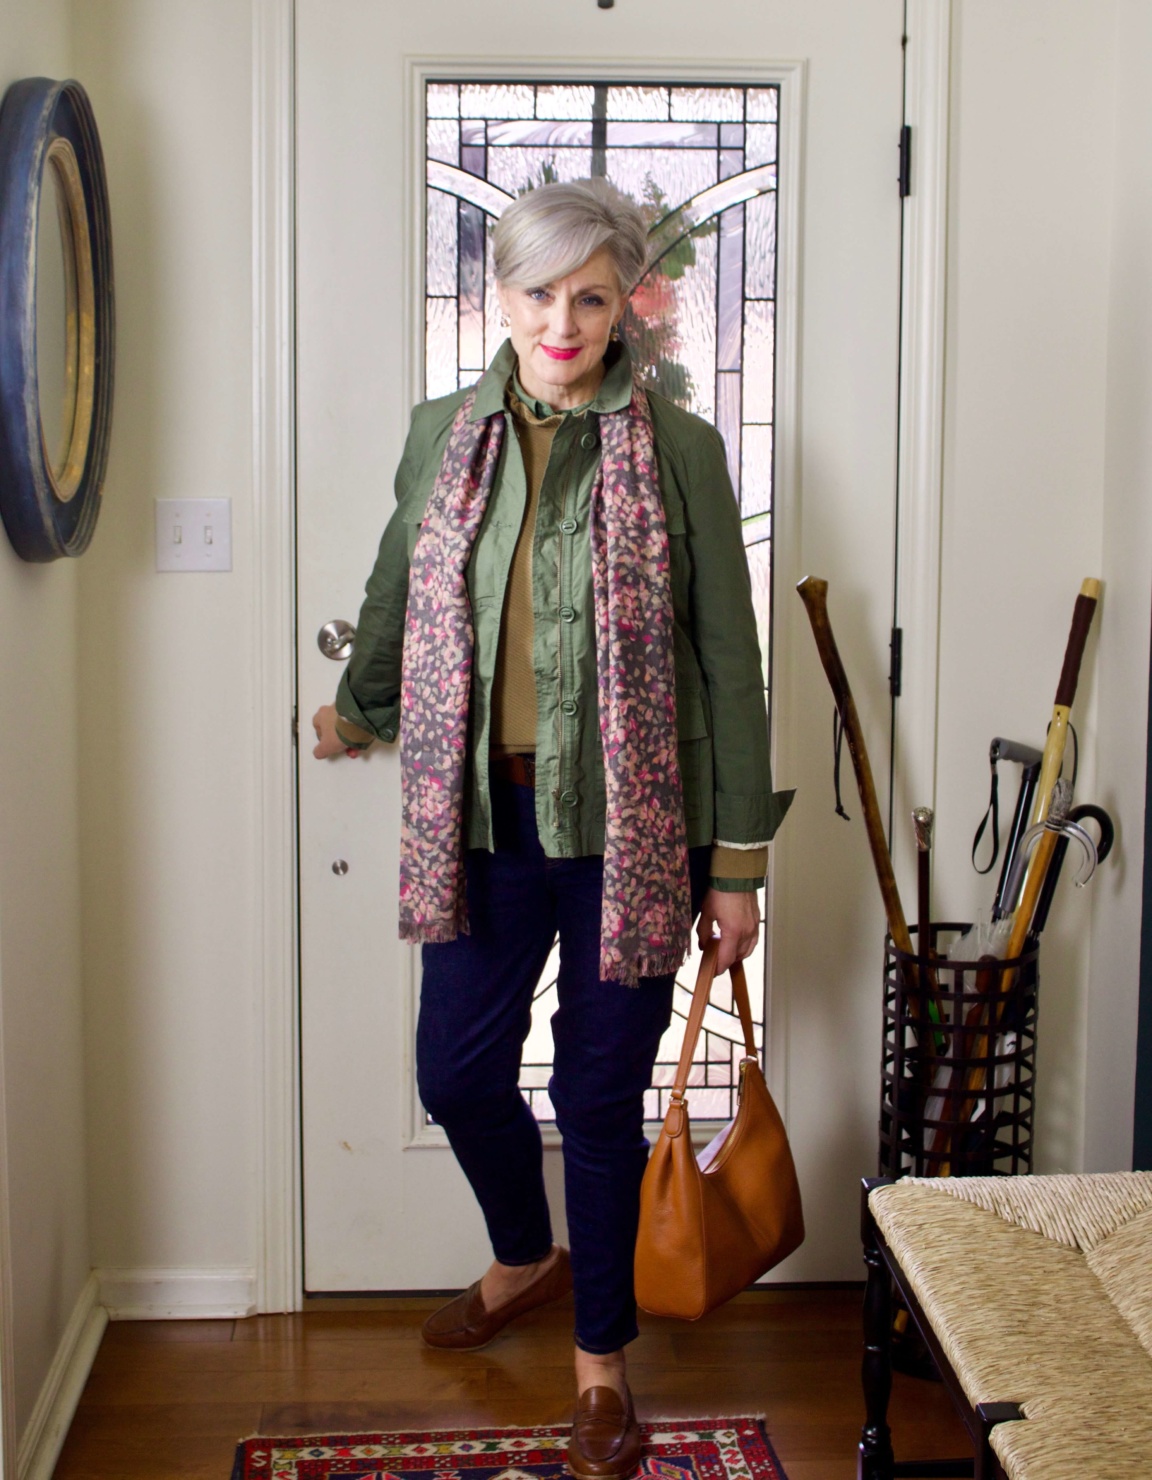 beth from Style at a Certain Age wears a ruffleneck sweater, skinny jeans, green utility jacket, hobo handbag, and loafers